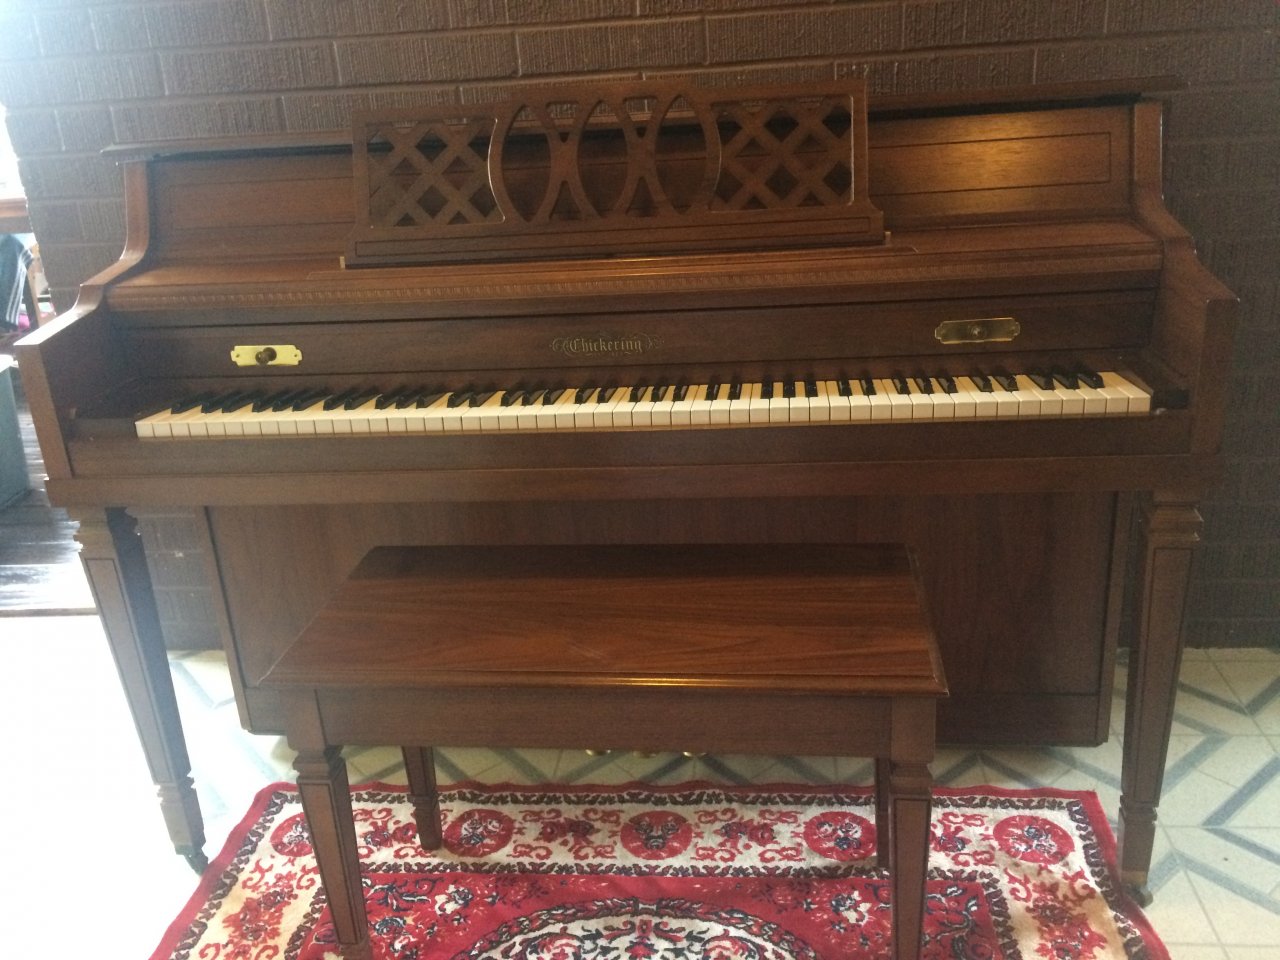 chickering piano serial numbers